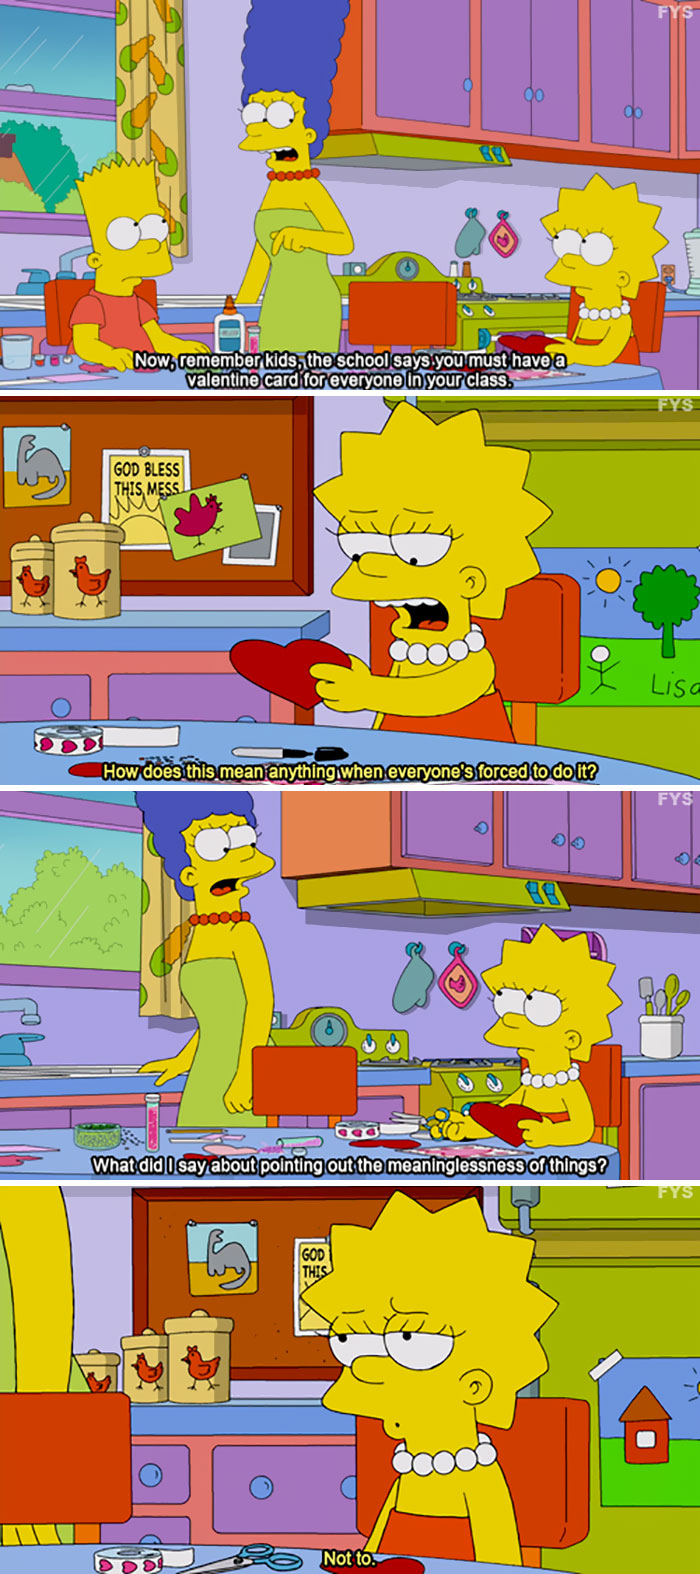 valentine hole simpsons - Now, remember kids, the school says you must have a valentine card for everyone in your class. God Bless This Mess Z Lisa How does this mean anything when everyone's forced to do it? What did I say about pointing out the meaningl